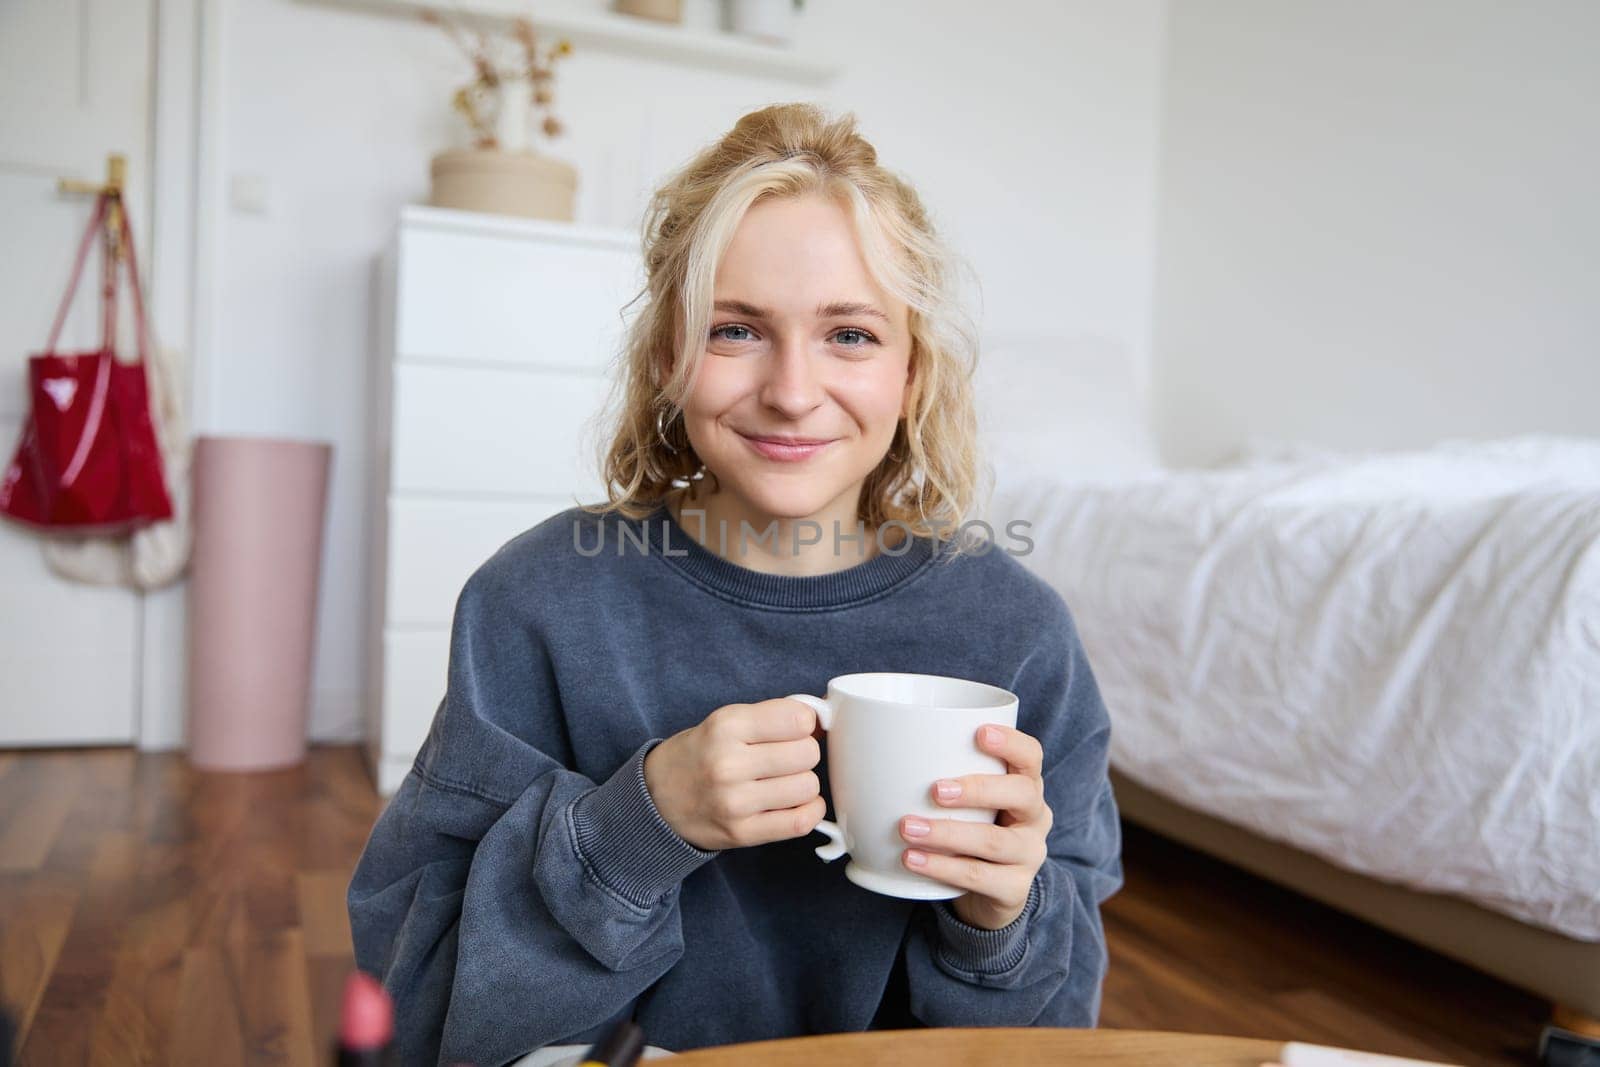 Image of young teenage girl sitting in her bedroom on floor, drinking cup of tea and enjoying day at home, smiling and looking at camera.